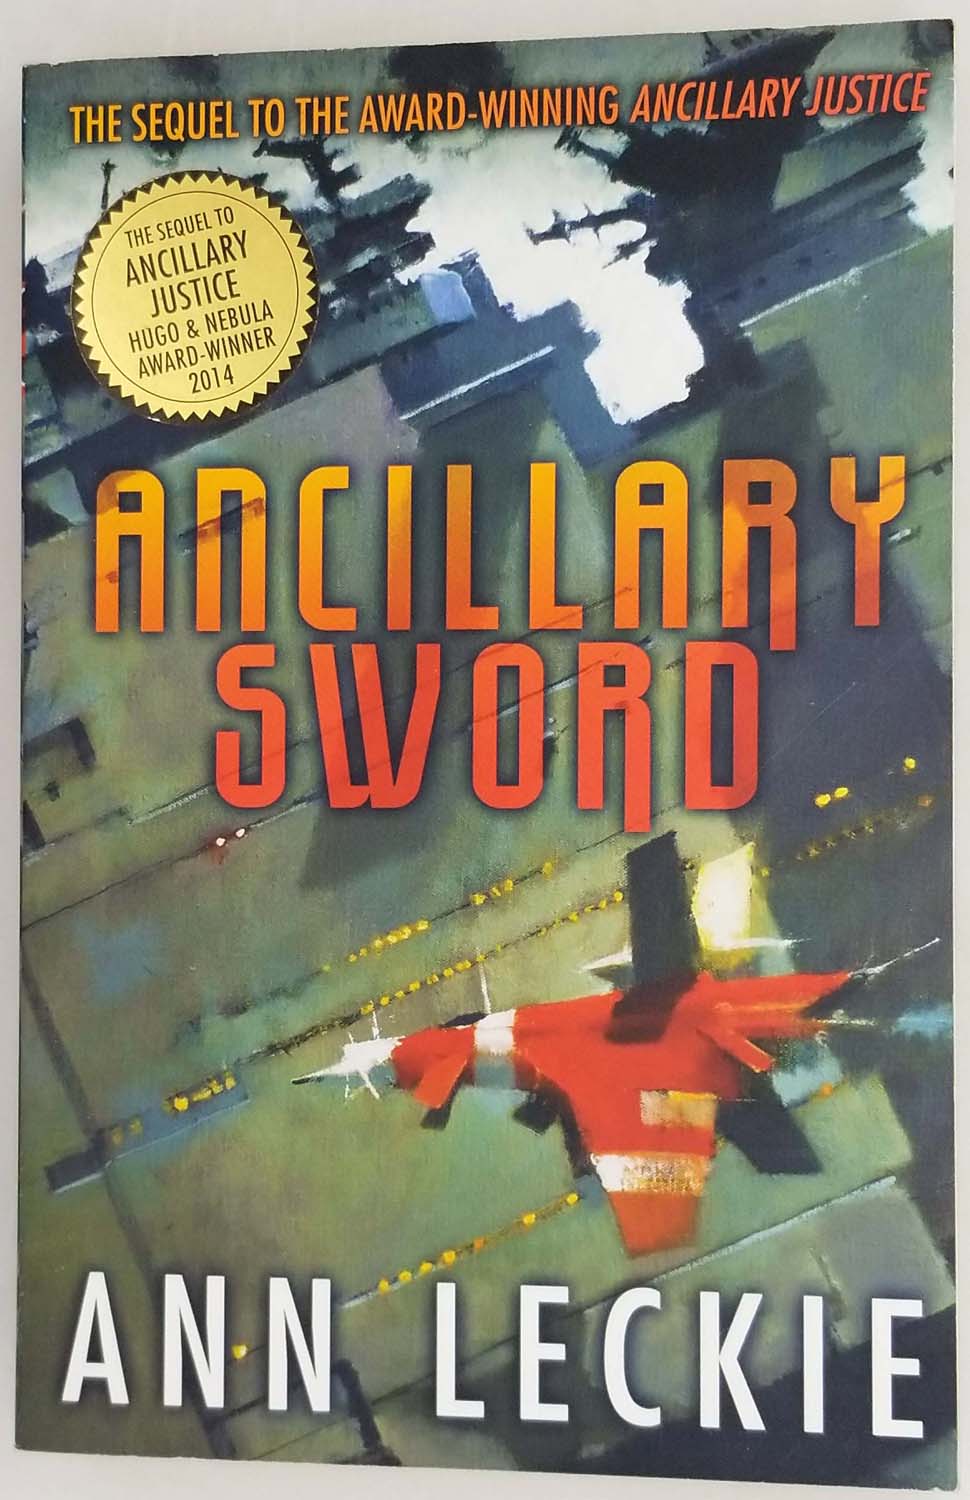 Ancillary Sword - Anne Leckie 2014 | 1st Edition